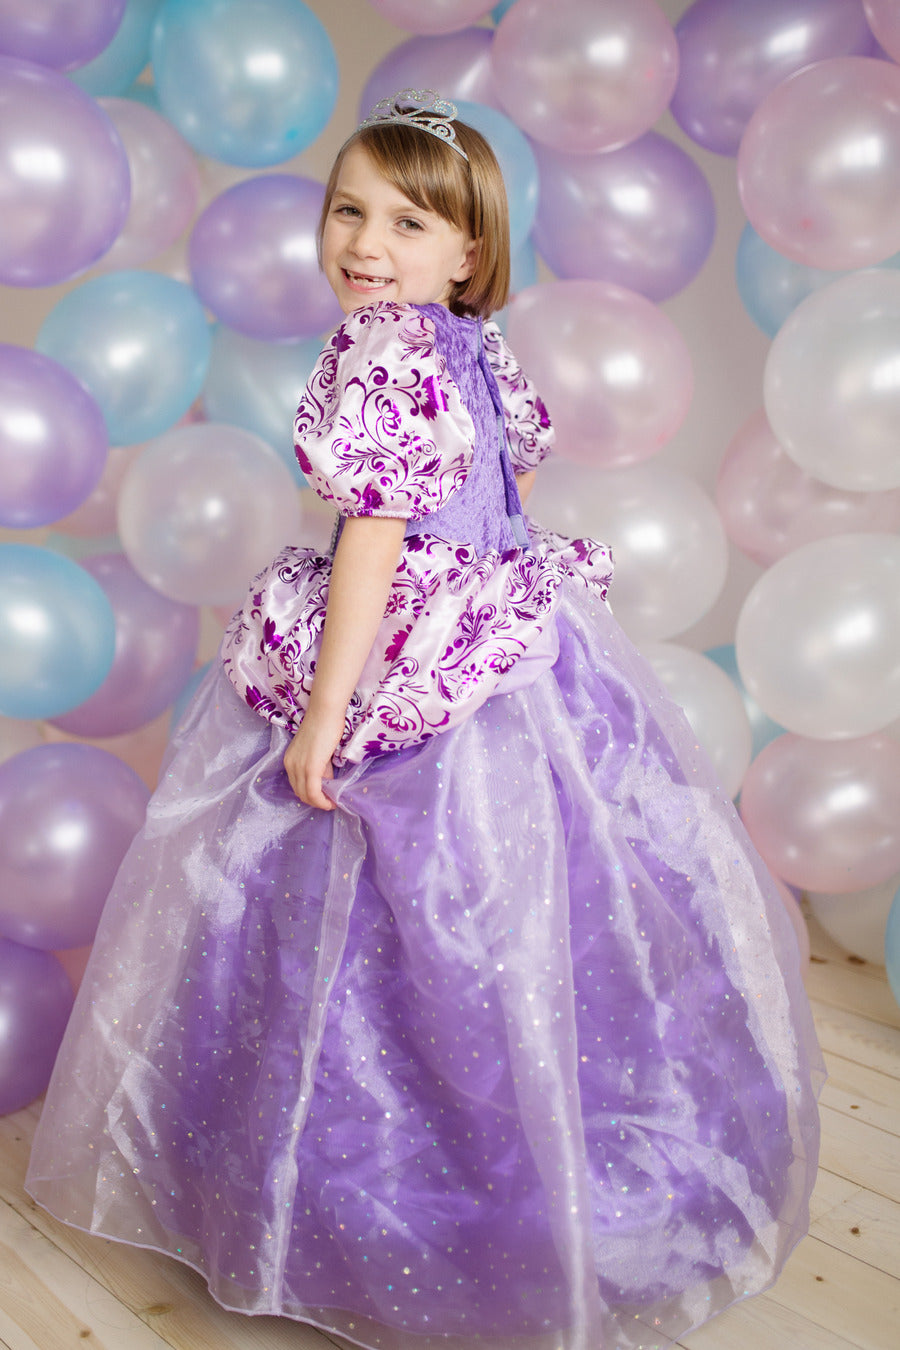 Royal Pretty Princess Dress (Assorted Colors- sold separately)